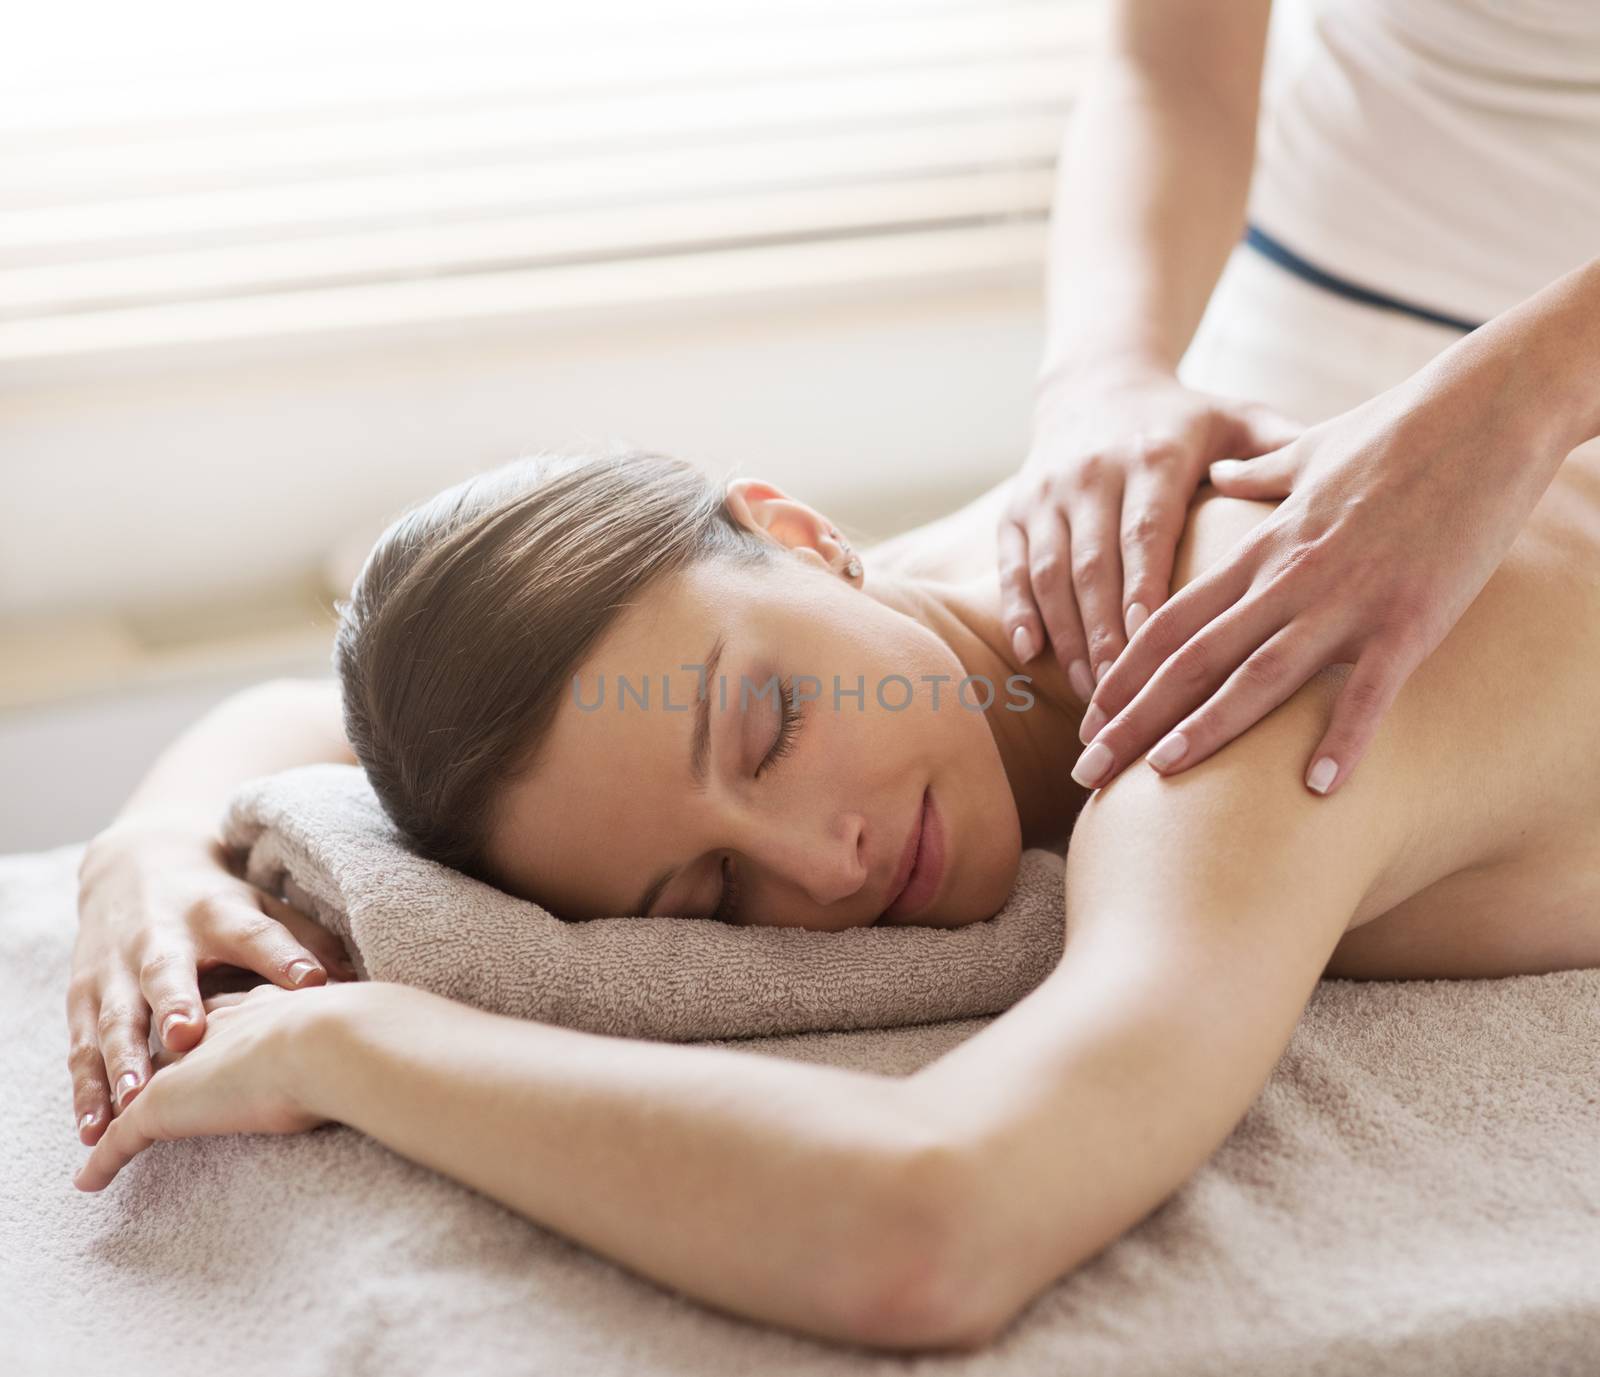 Beautiful woman receiving a relaxing back massage at spa.